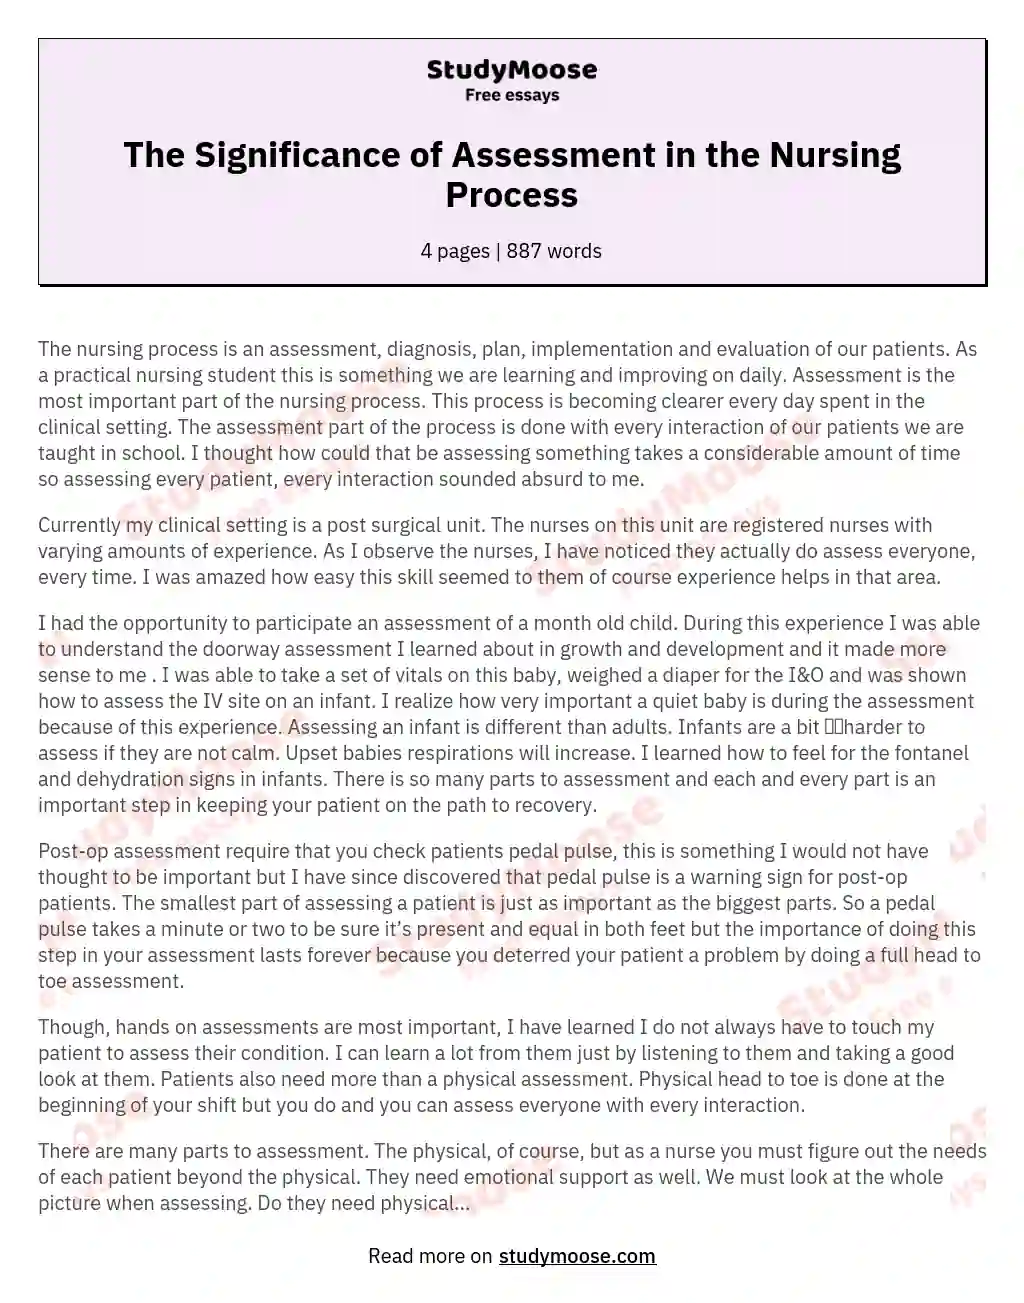 The Significance of Assessment in the Nursing Process essay